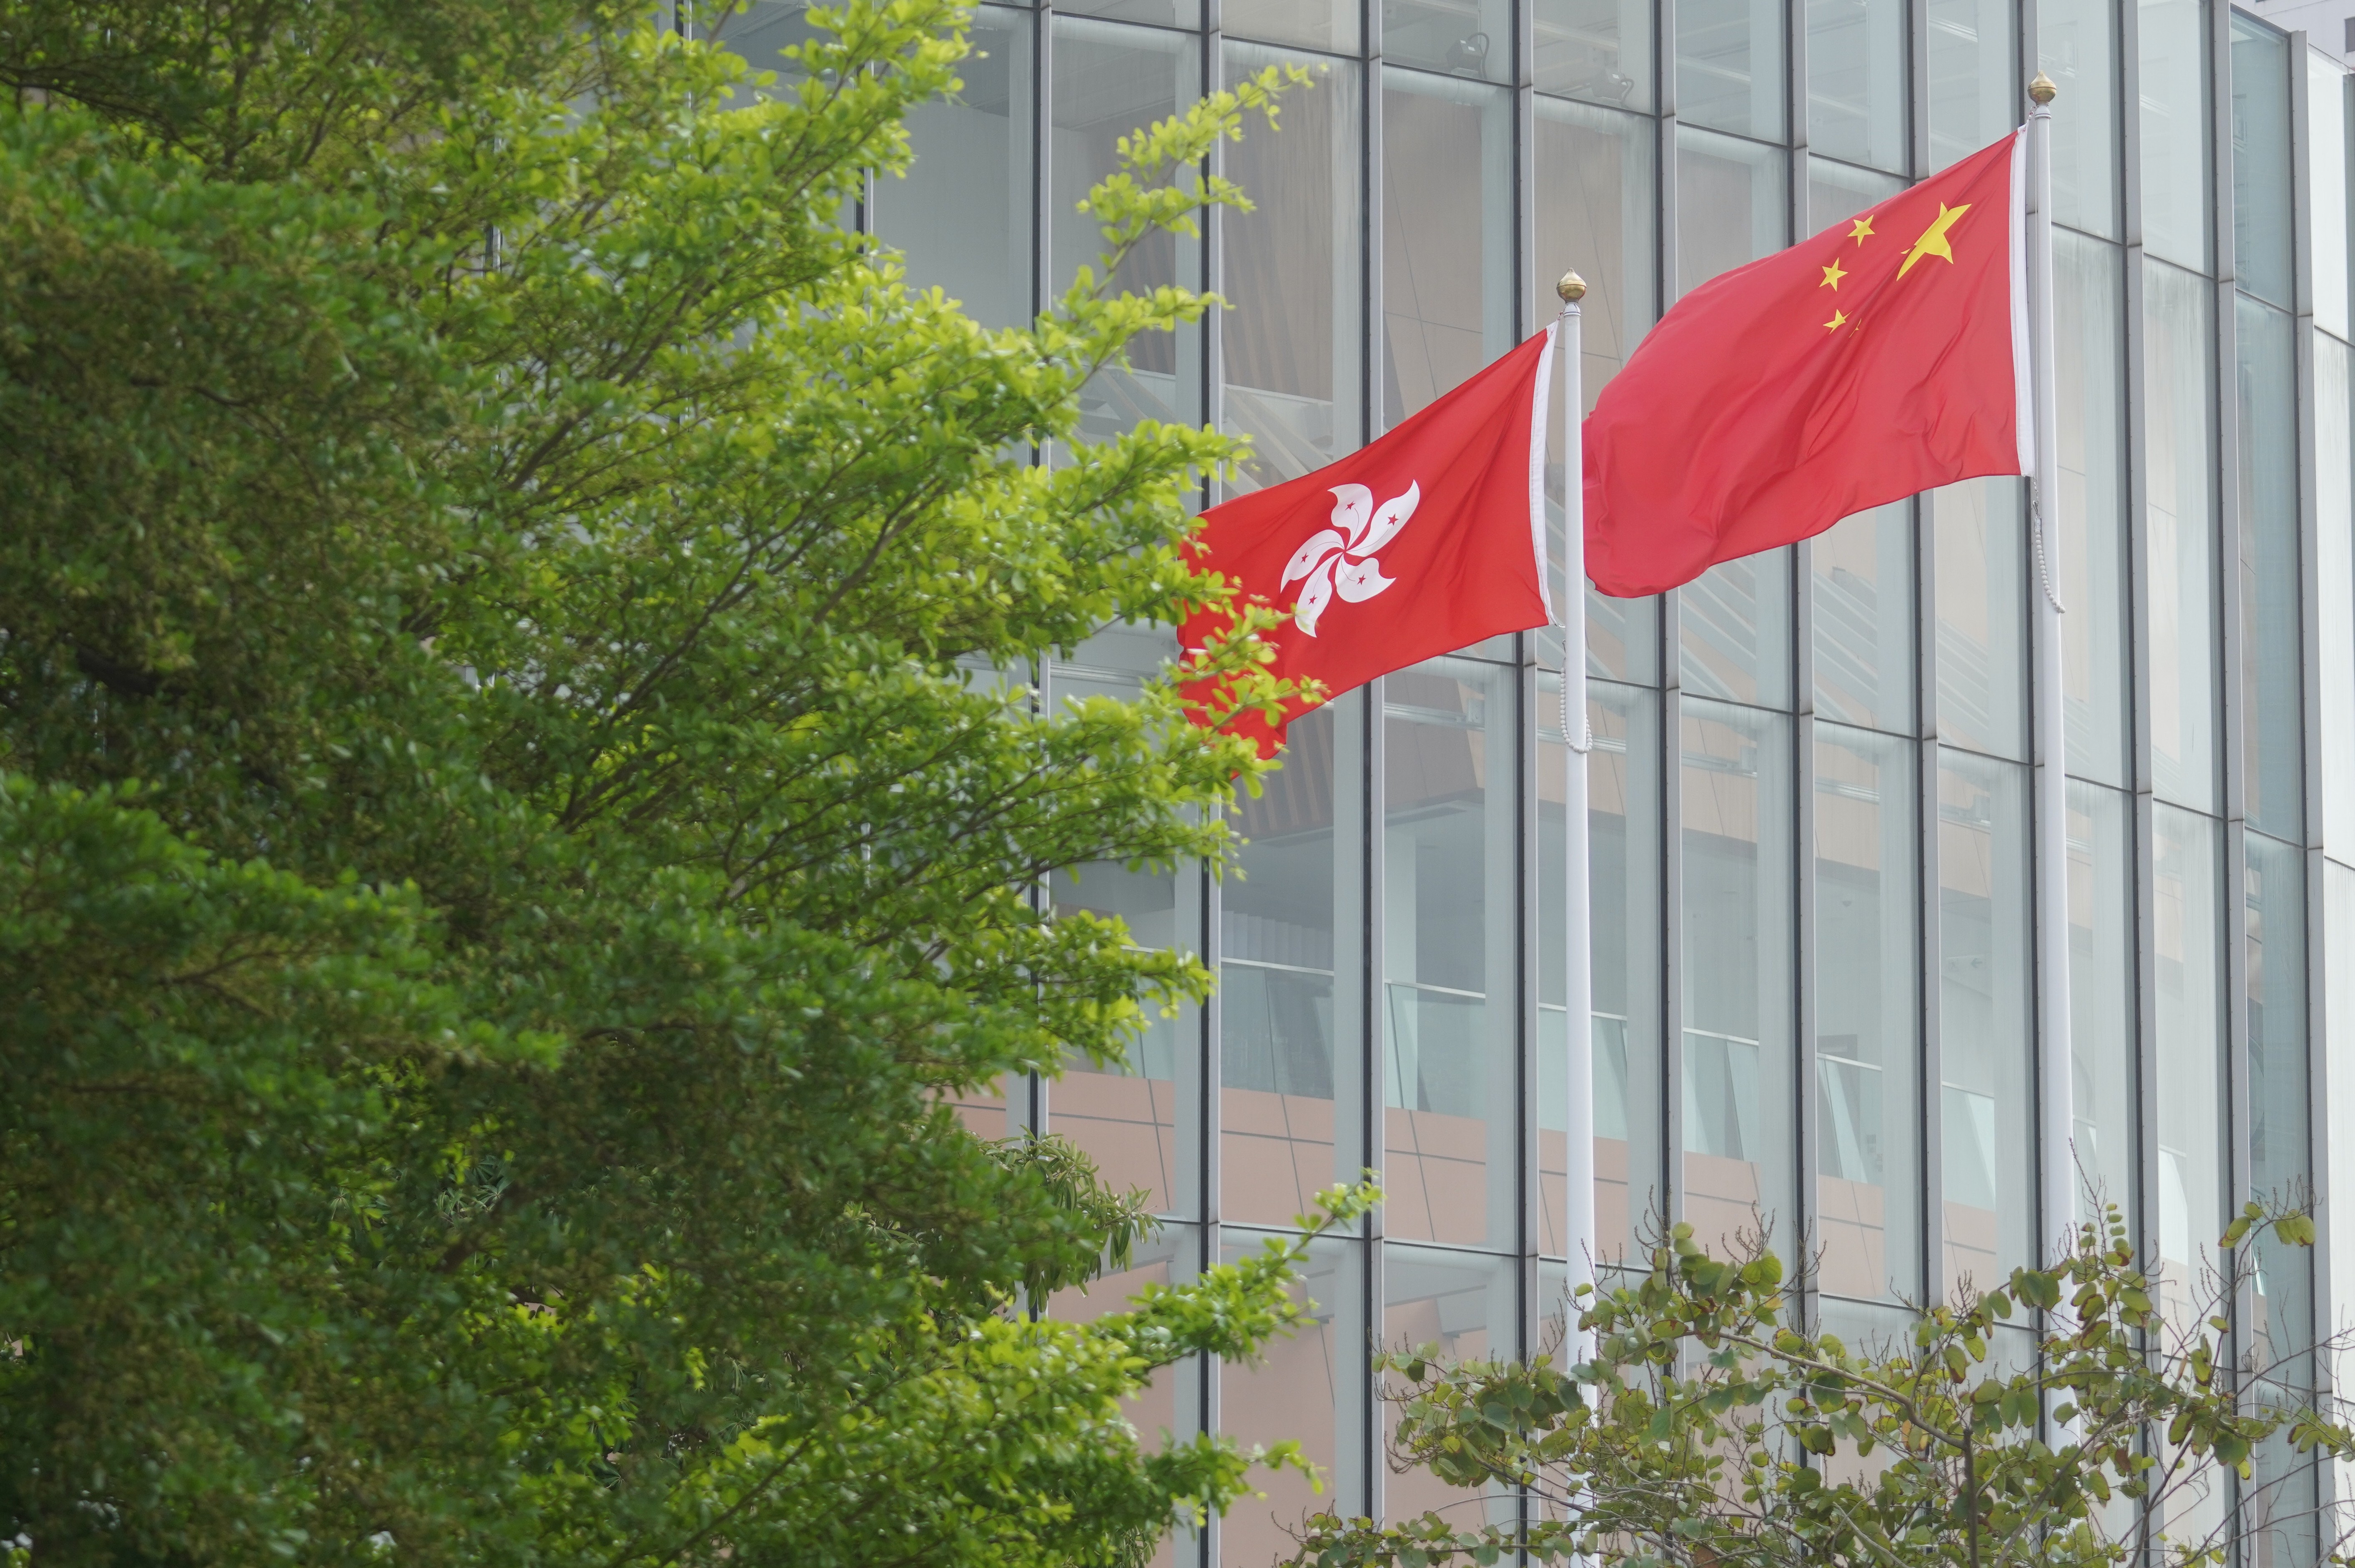 The flags of Hong Kong and China fly outside the Legislative Council building in Admiralty, on March 30. Photo: Winson Wong